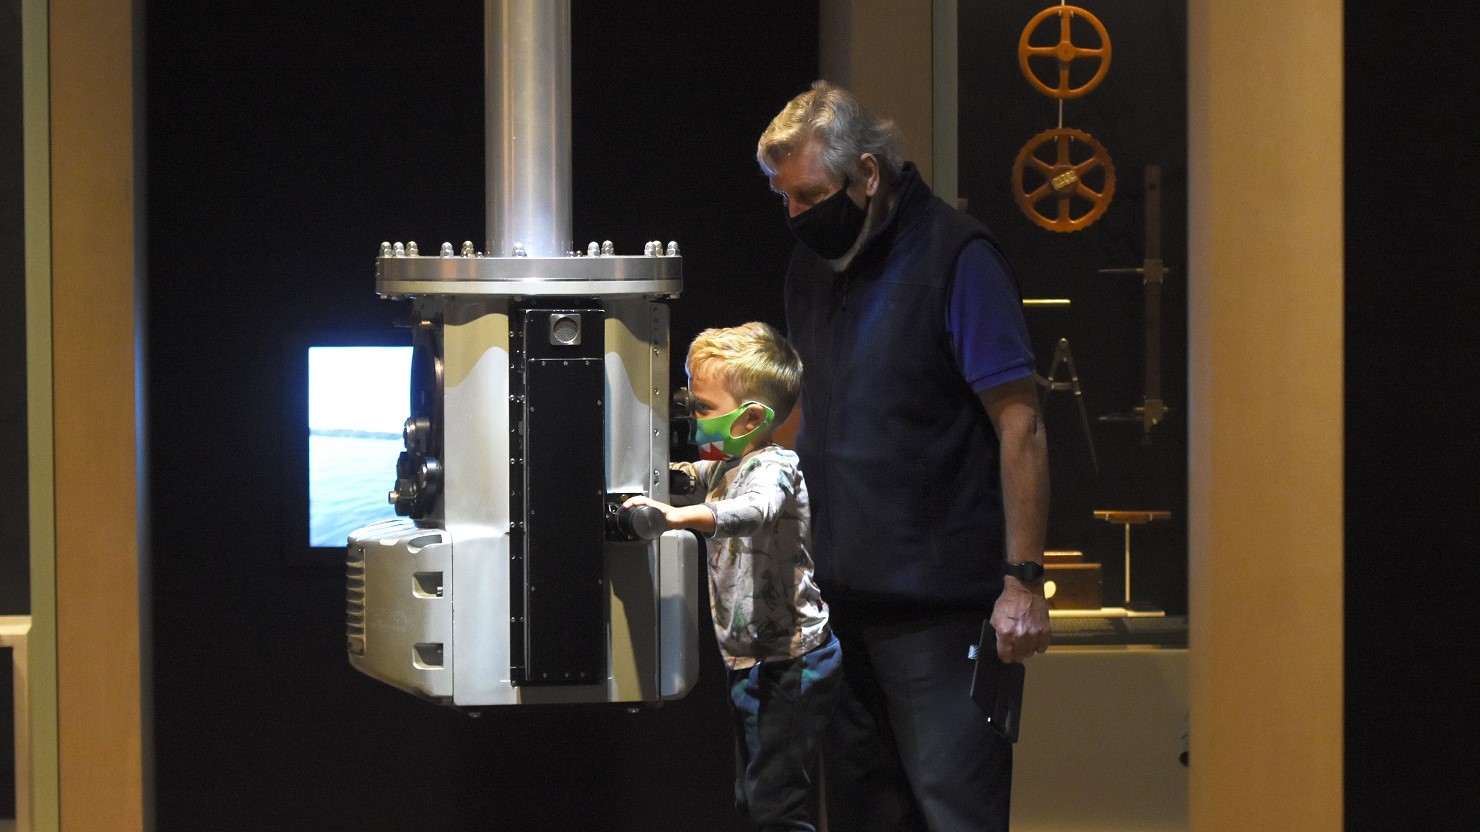 A boy and adult using one of the interactives in the Port of Plymouth gallery at The Box